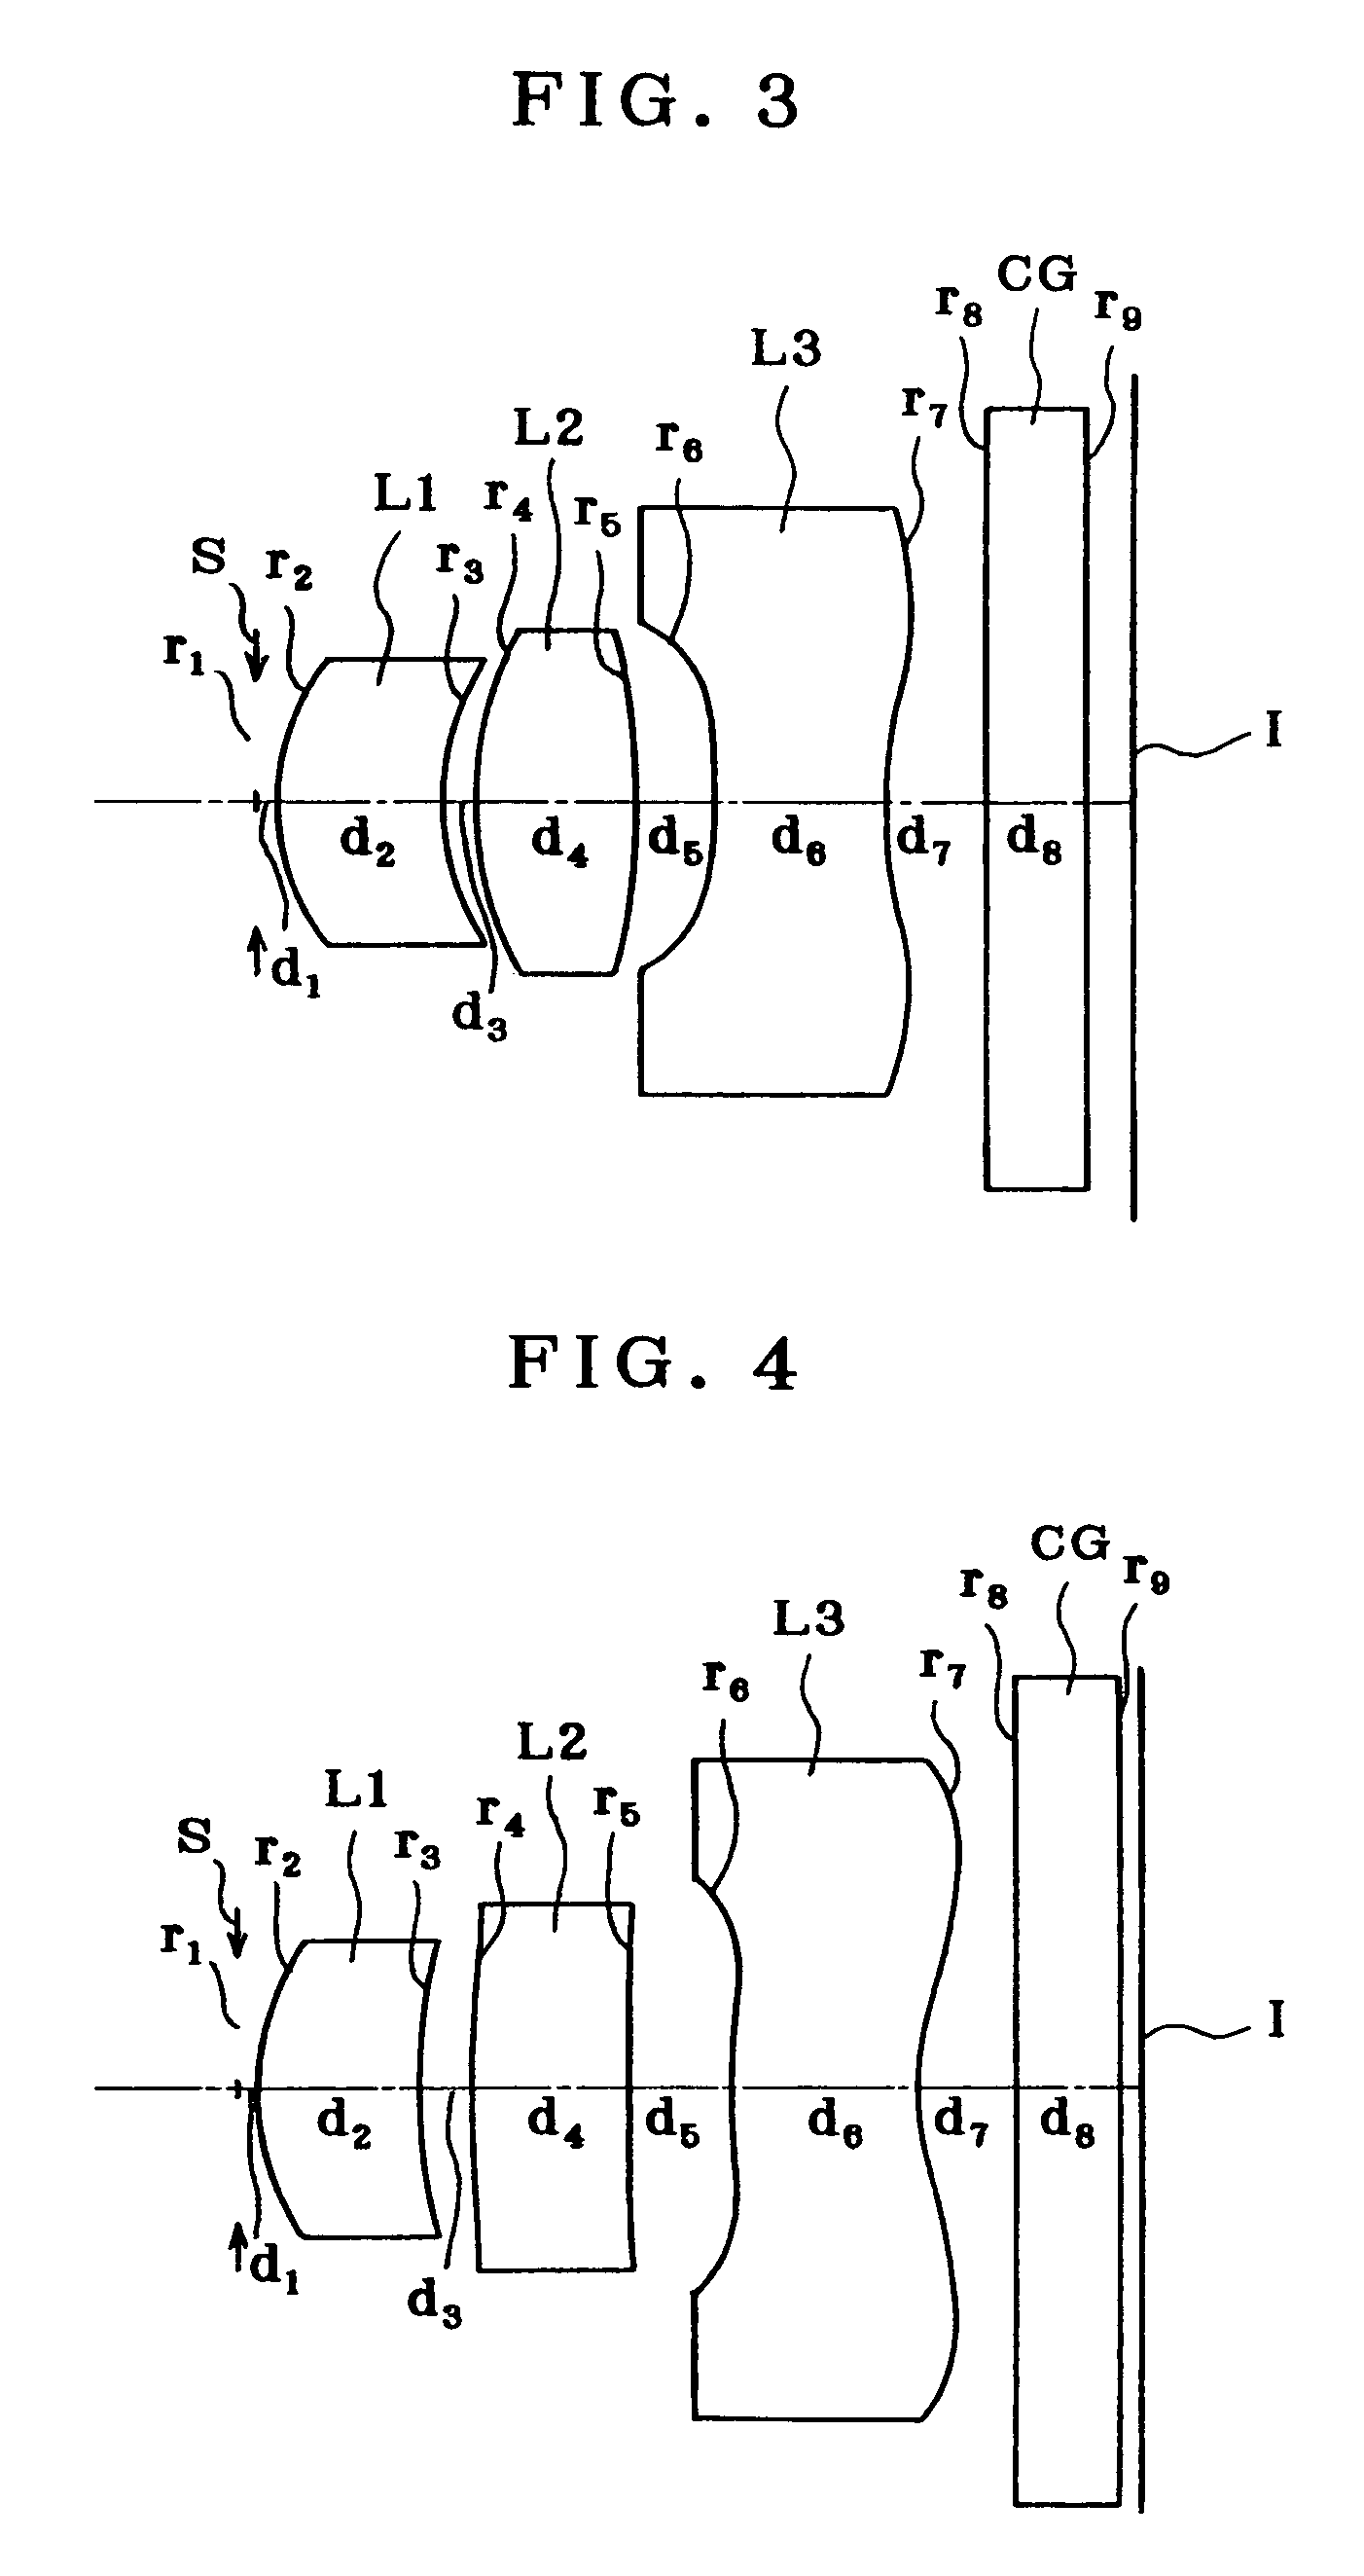 Image-formation optical system, and imaging system